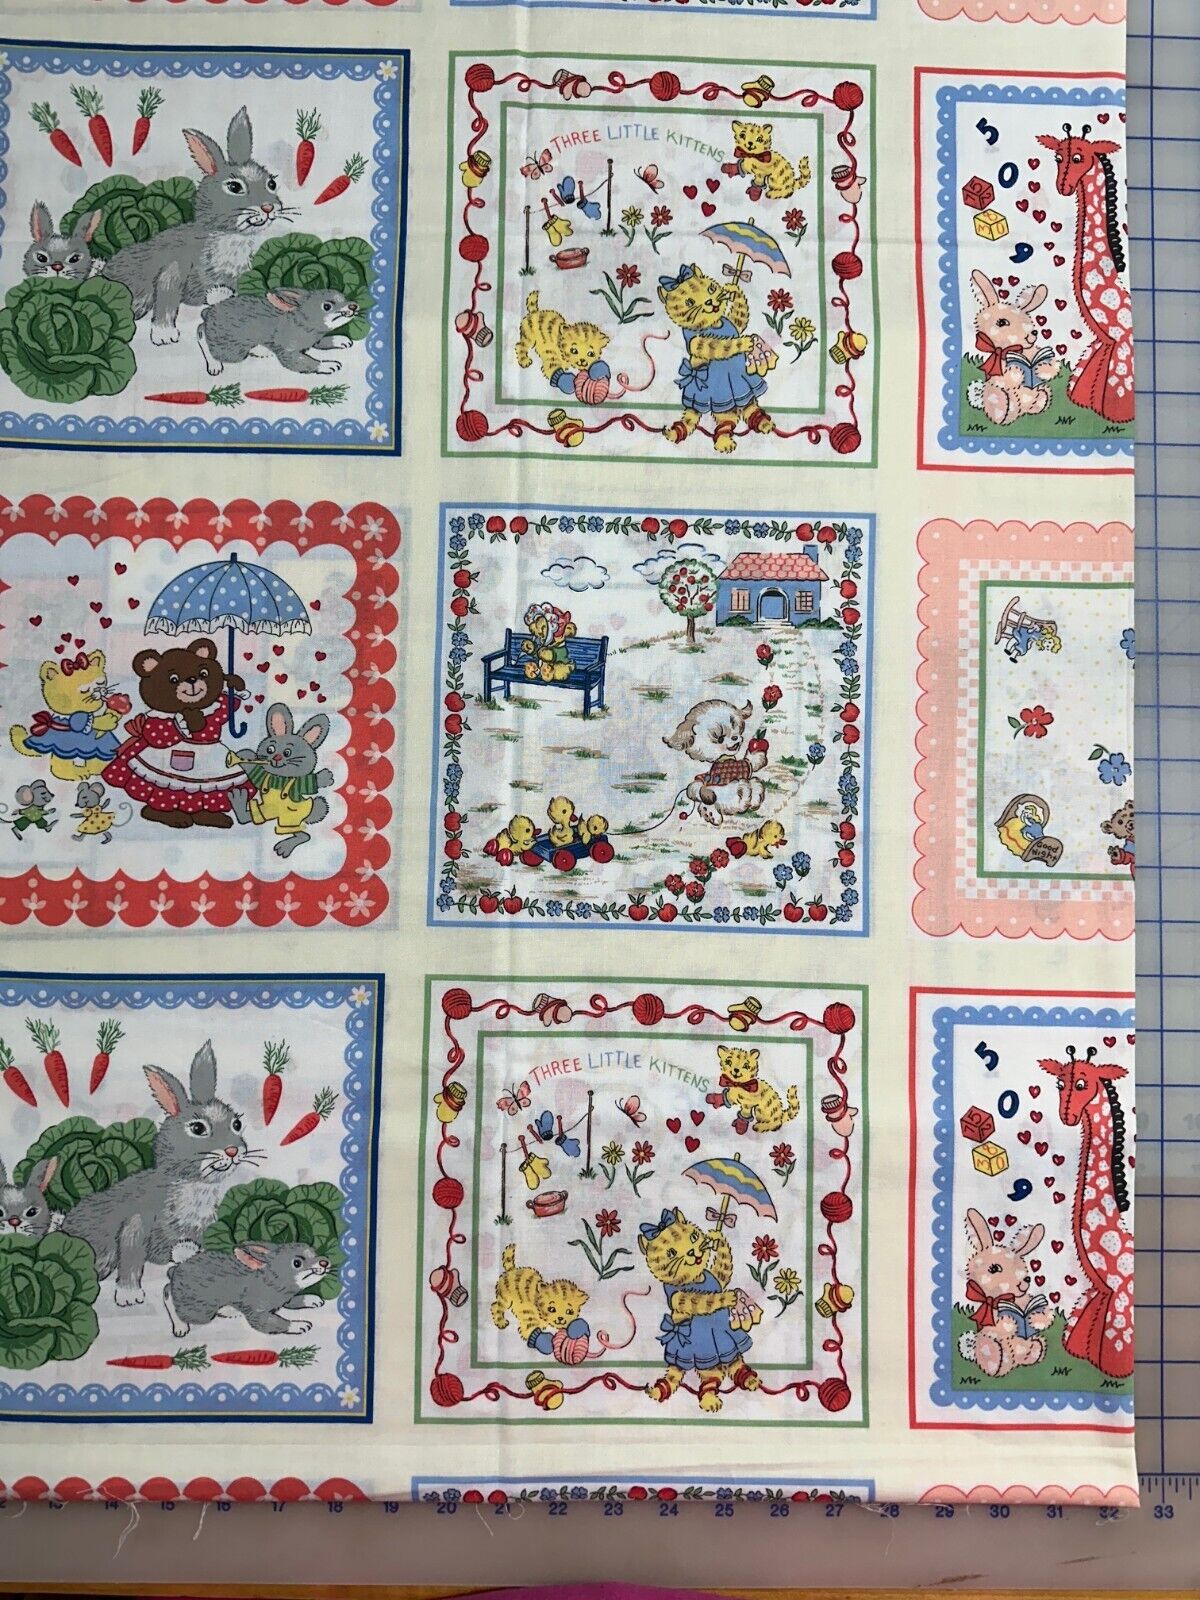 Classic Cottons 2003 Vintage Childrens Hankies 17x43 Fabric Panel Reproduction